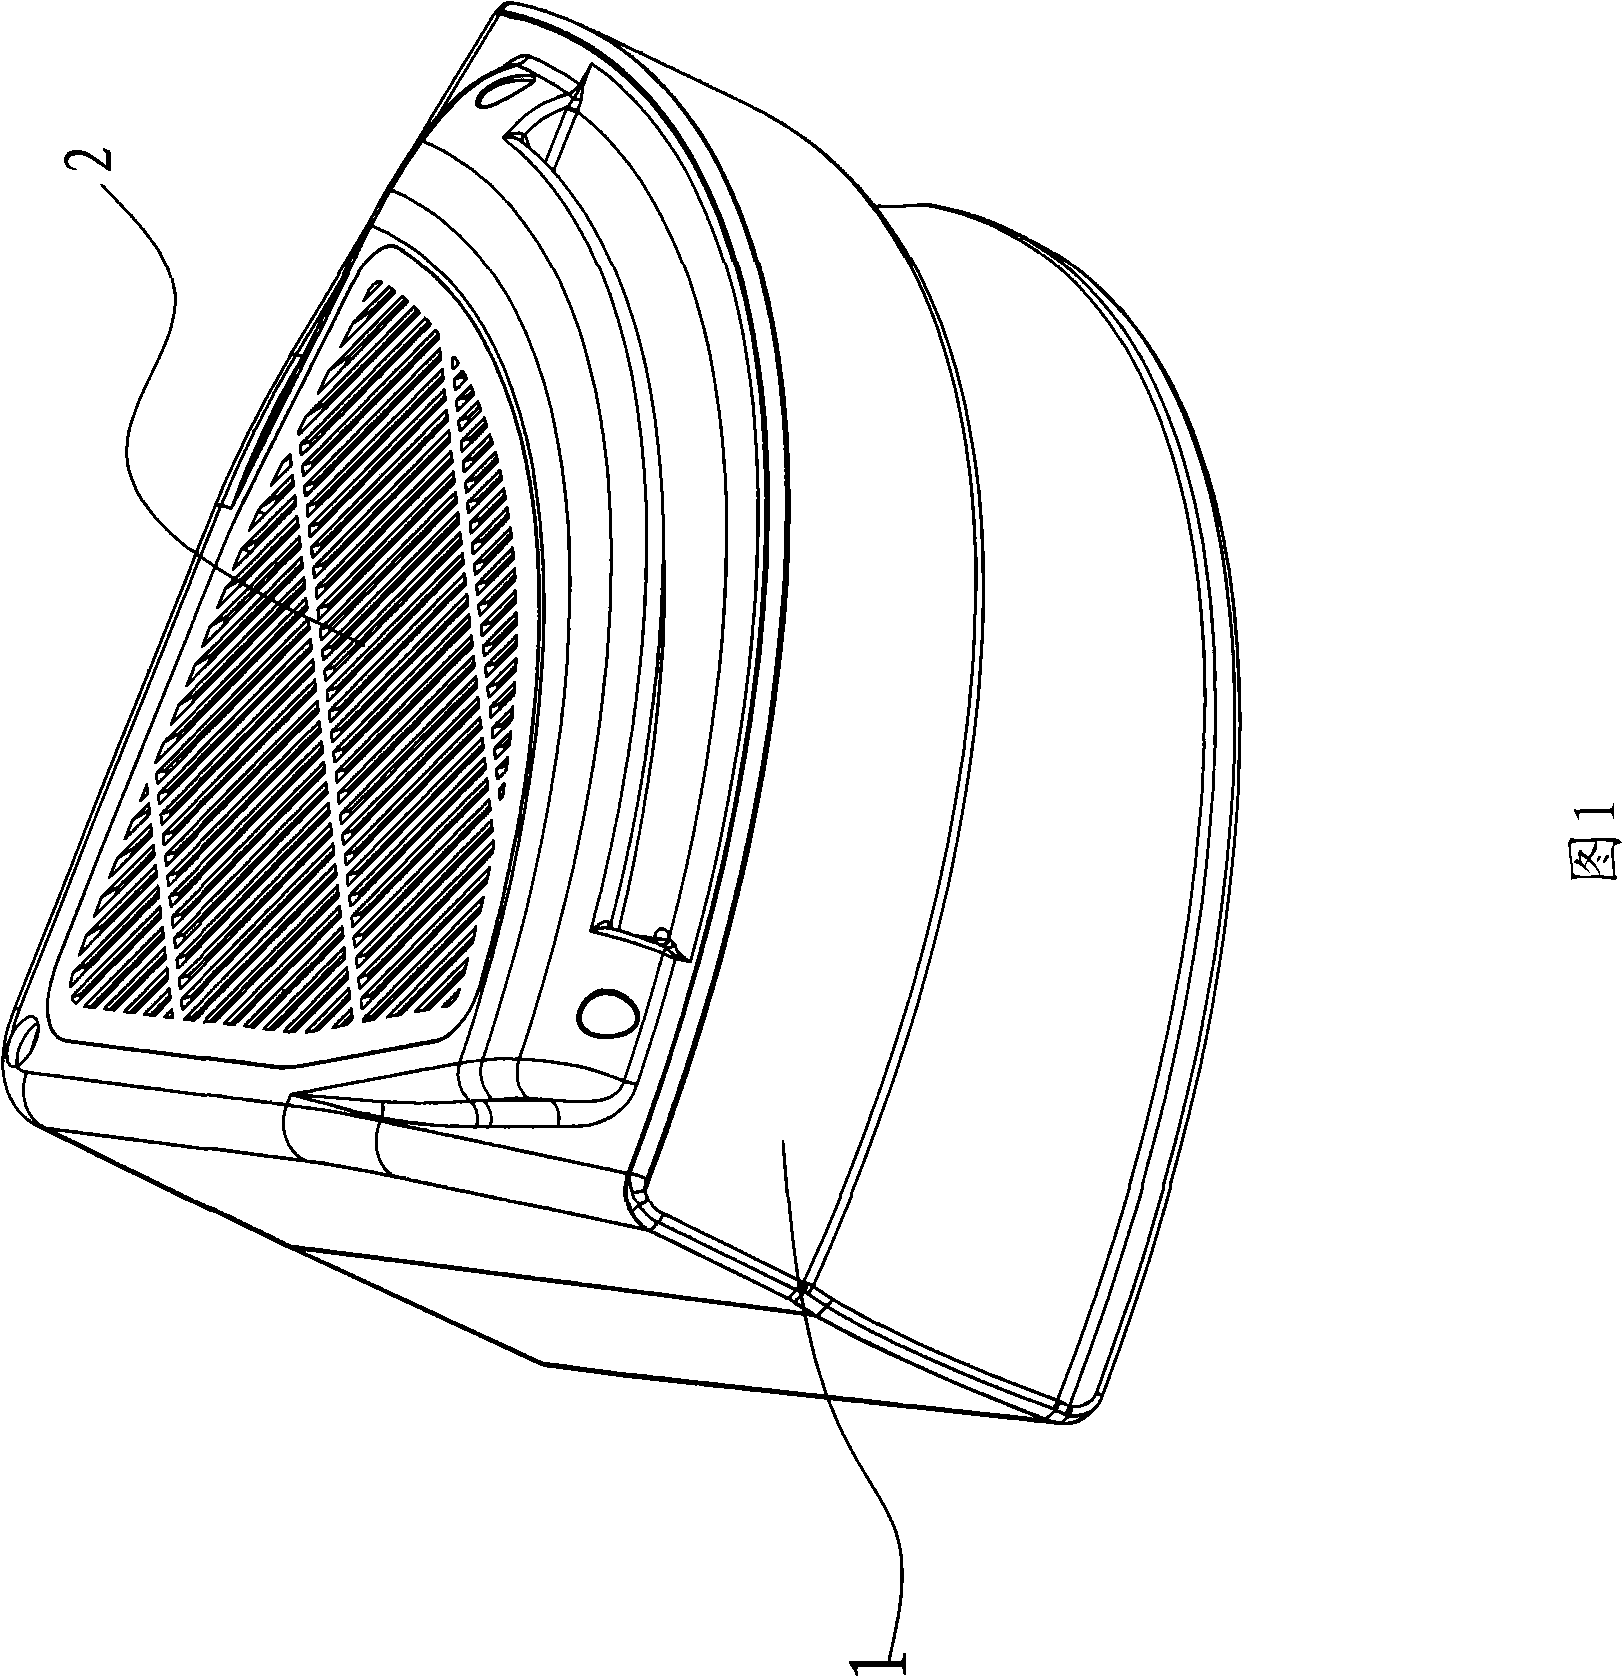 Toilet air purification device